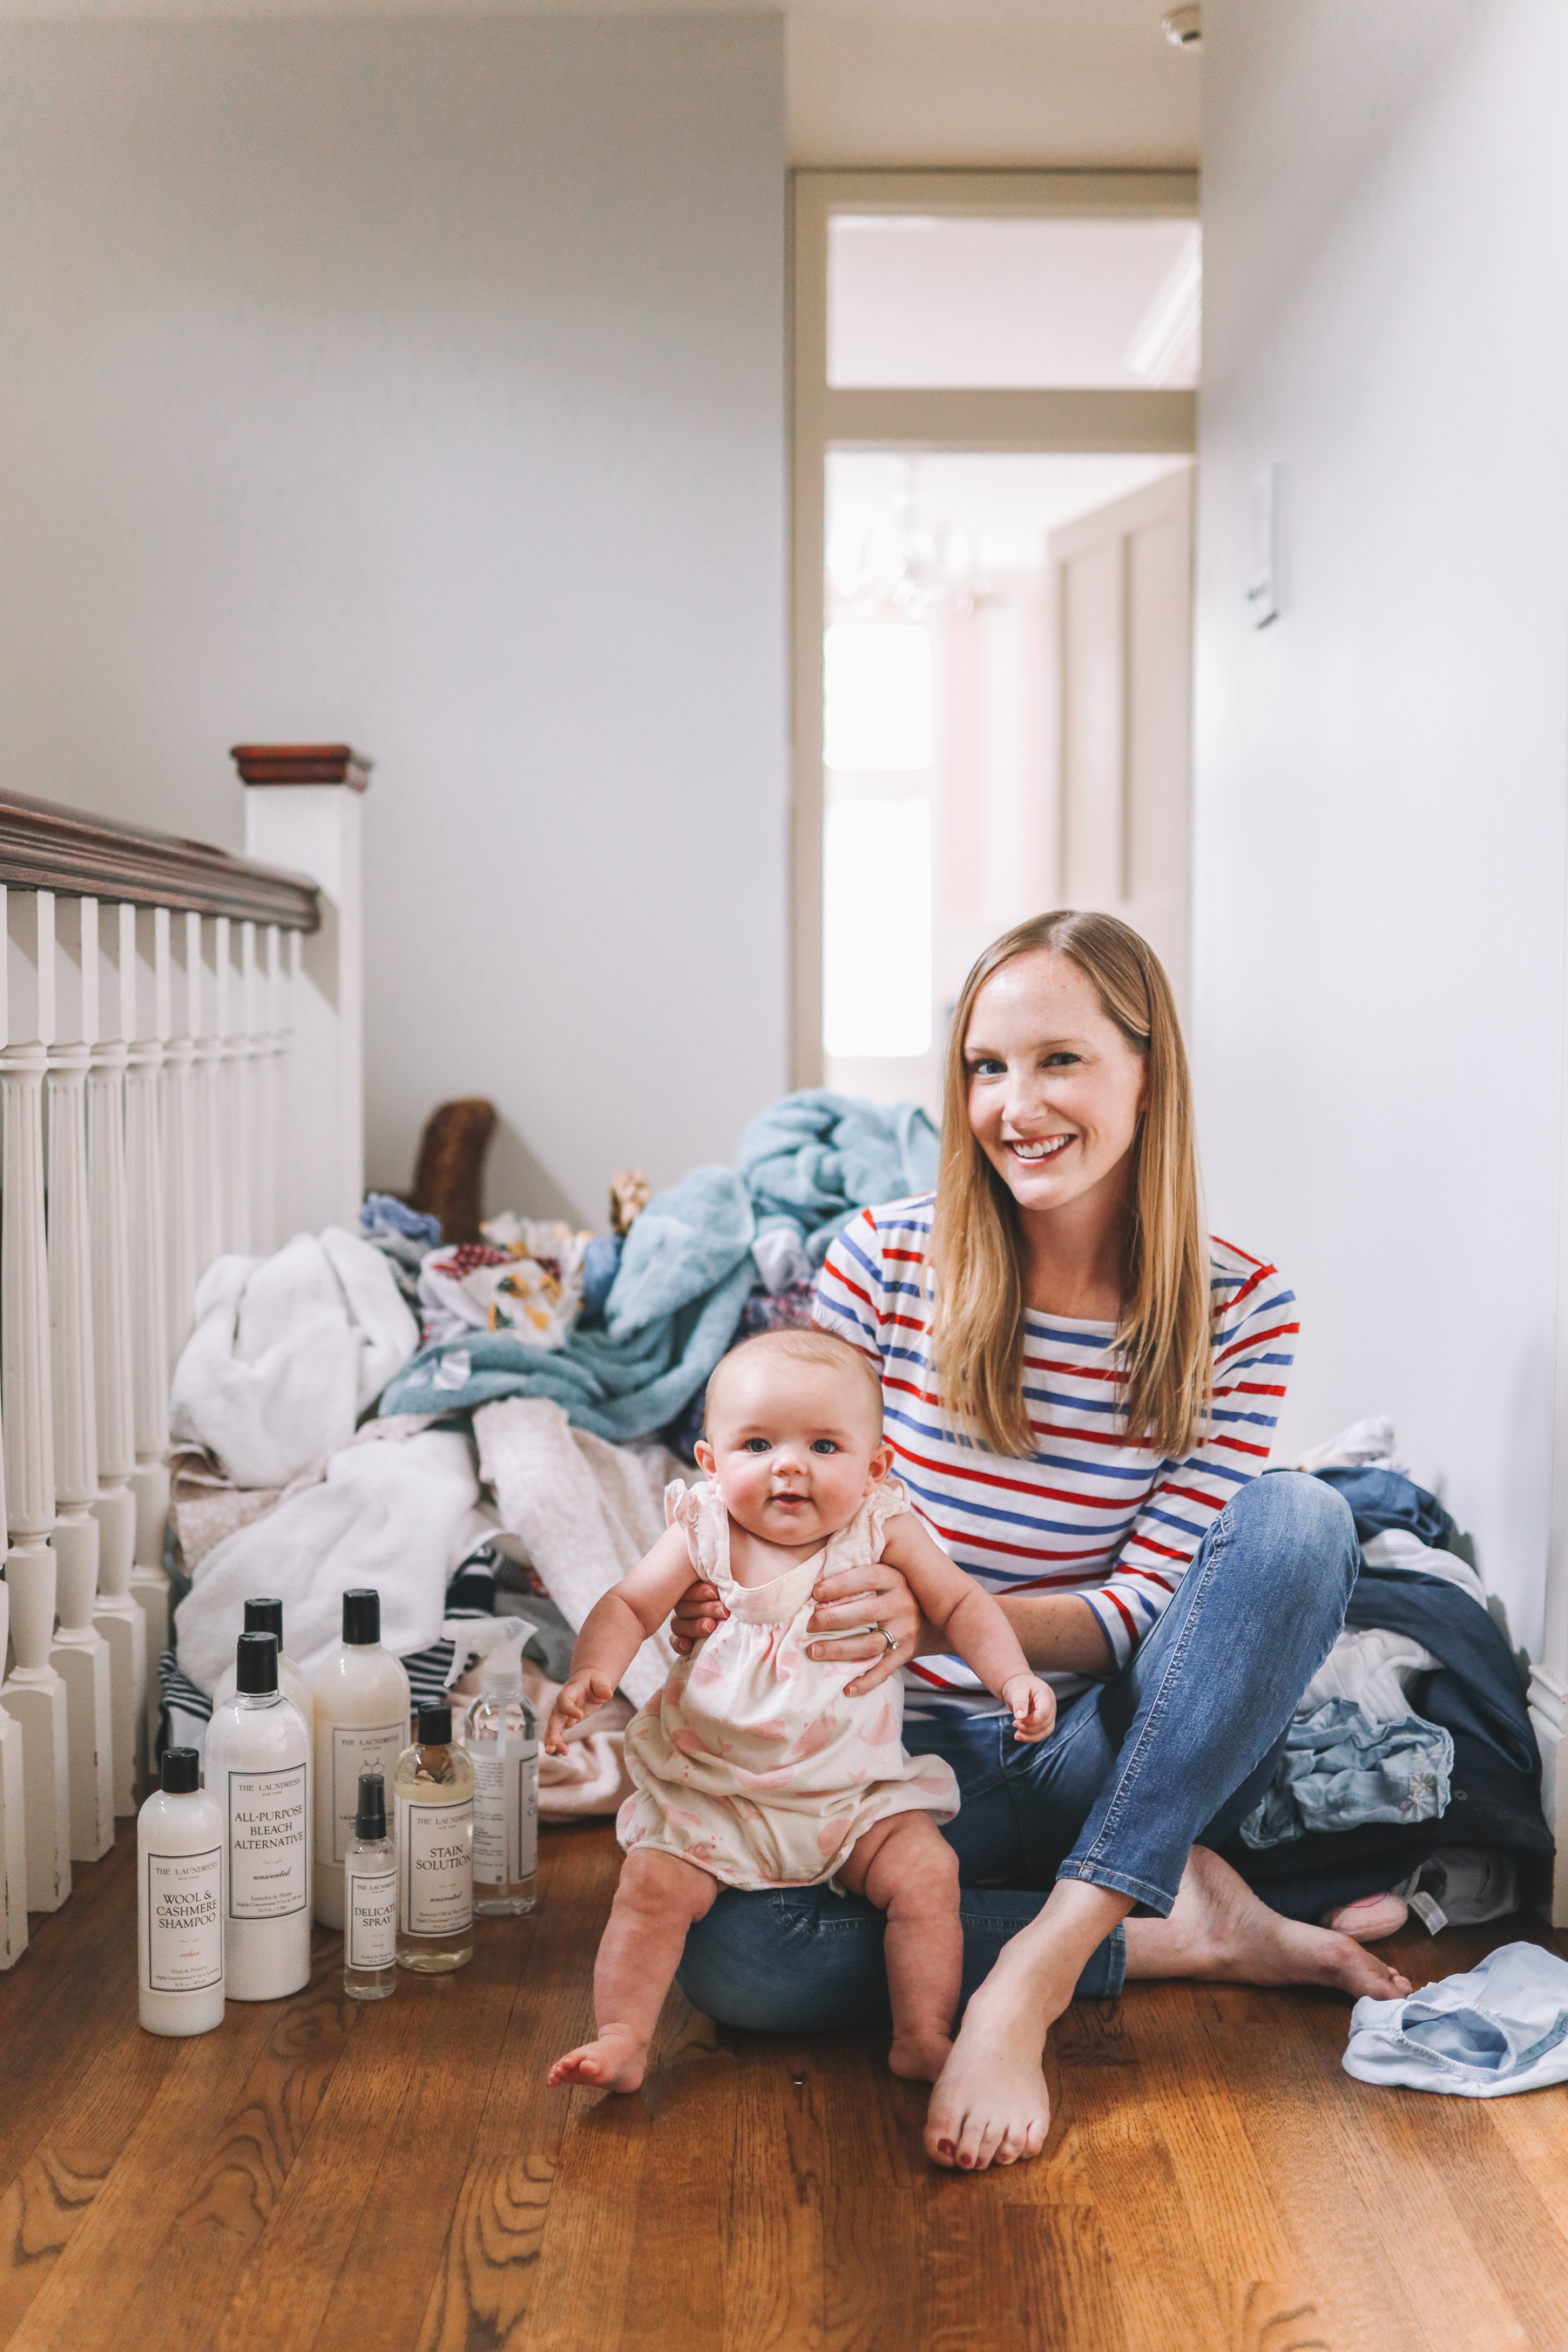 giveaway with laundress is promoted by this woman and her baby with laundry in the background